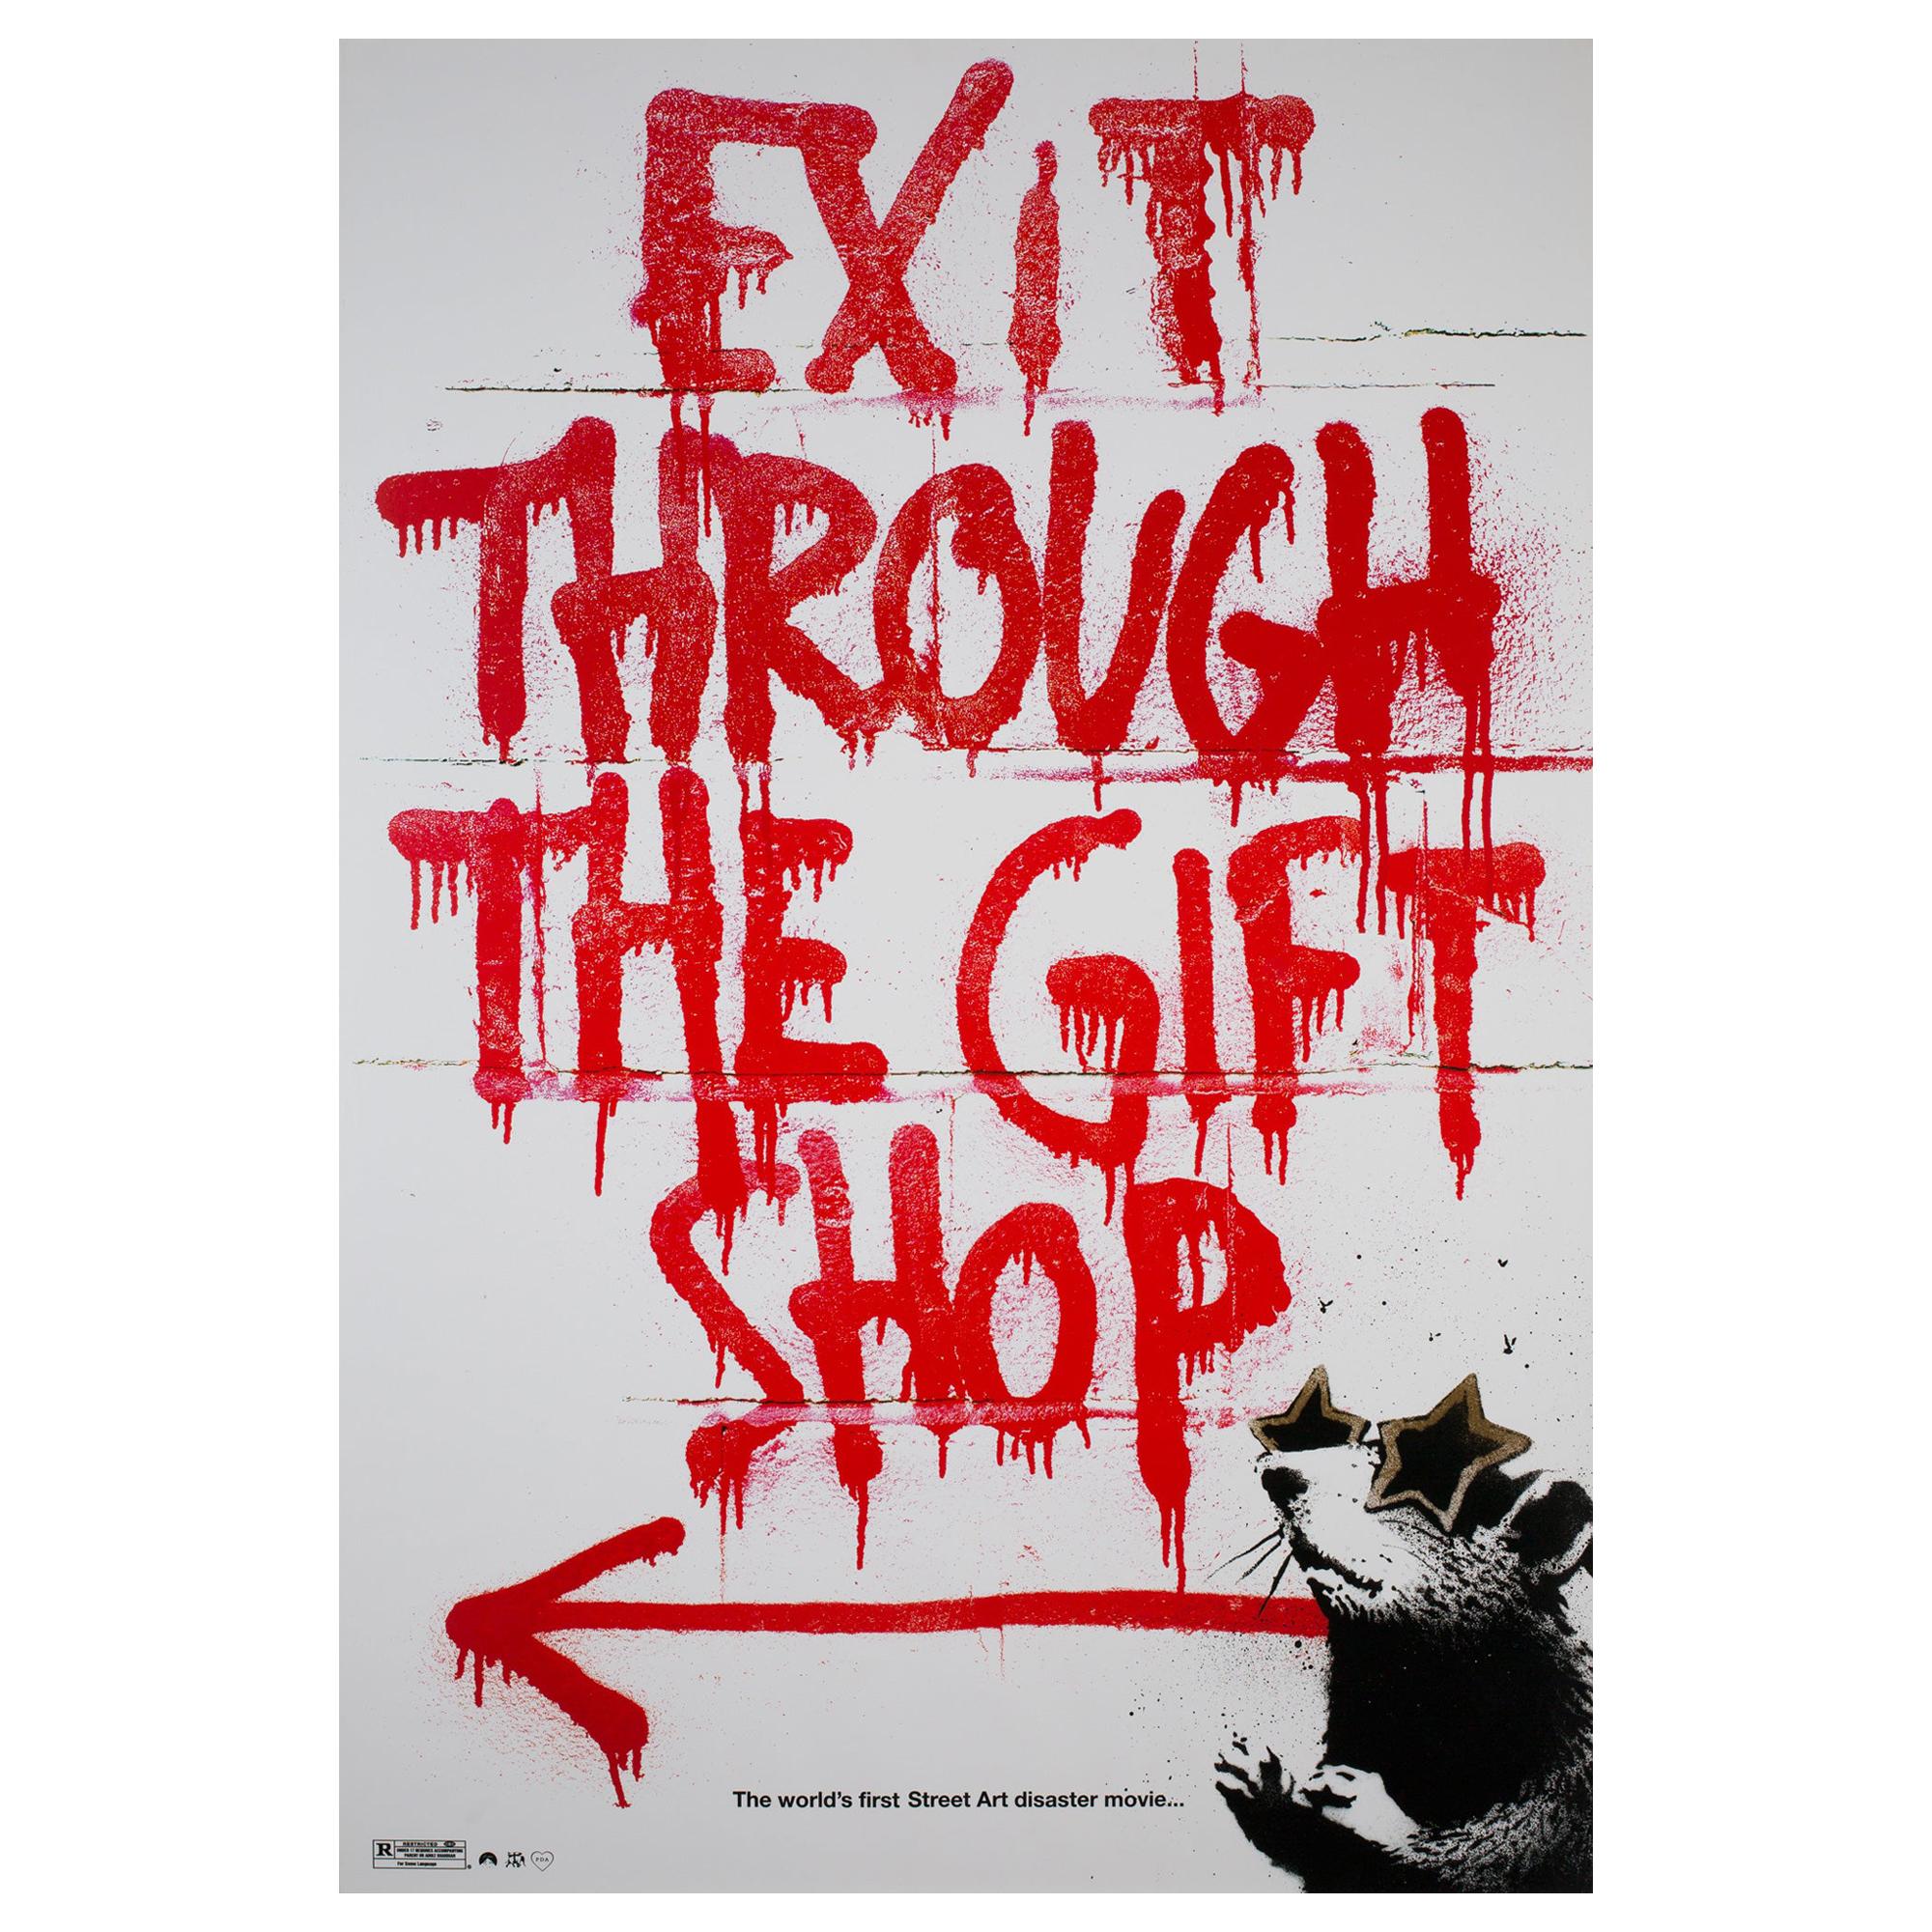 'Exit Through The Gift Shop' 2010 US 1 Sheet Film Poster, Banksy